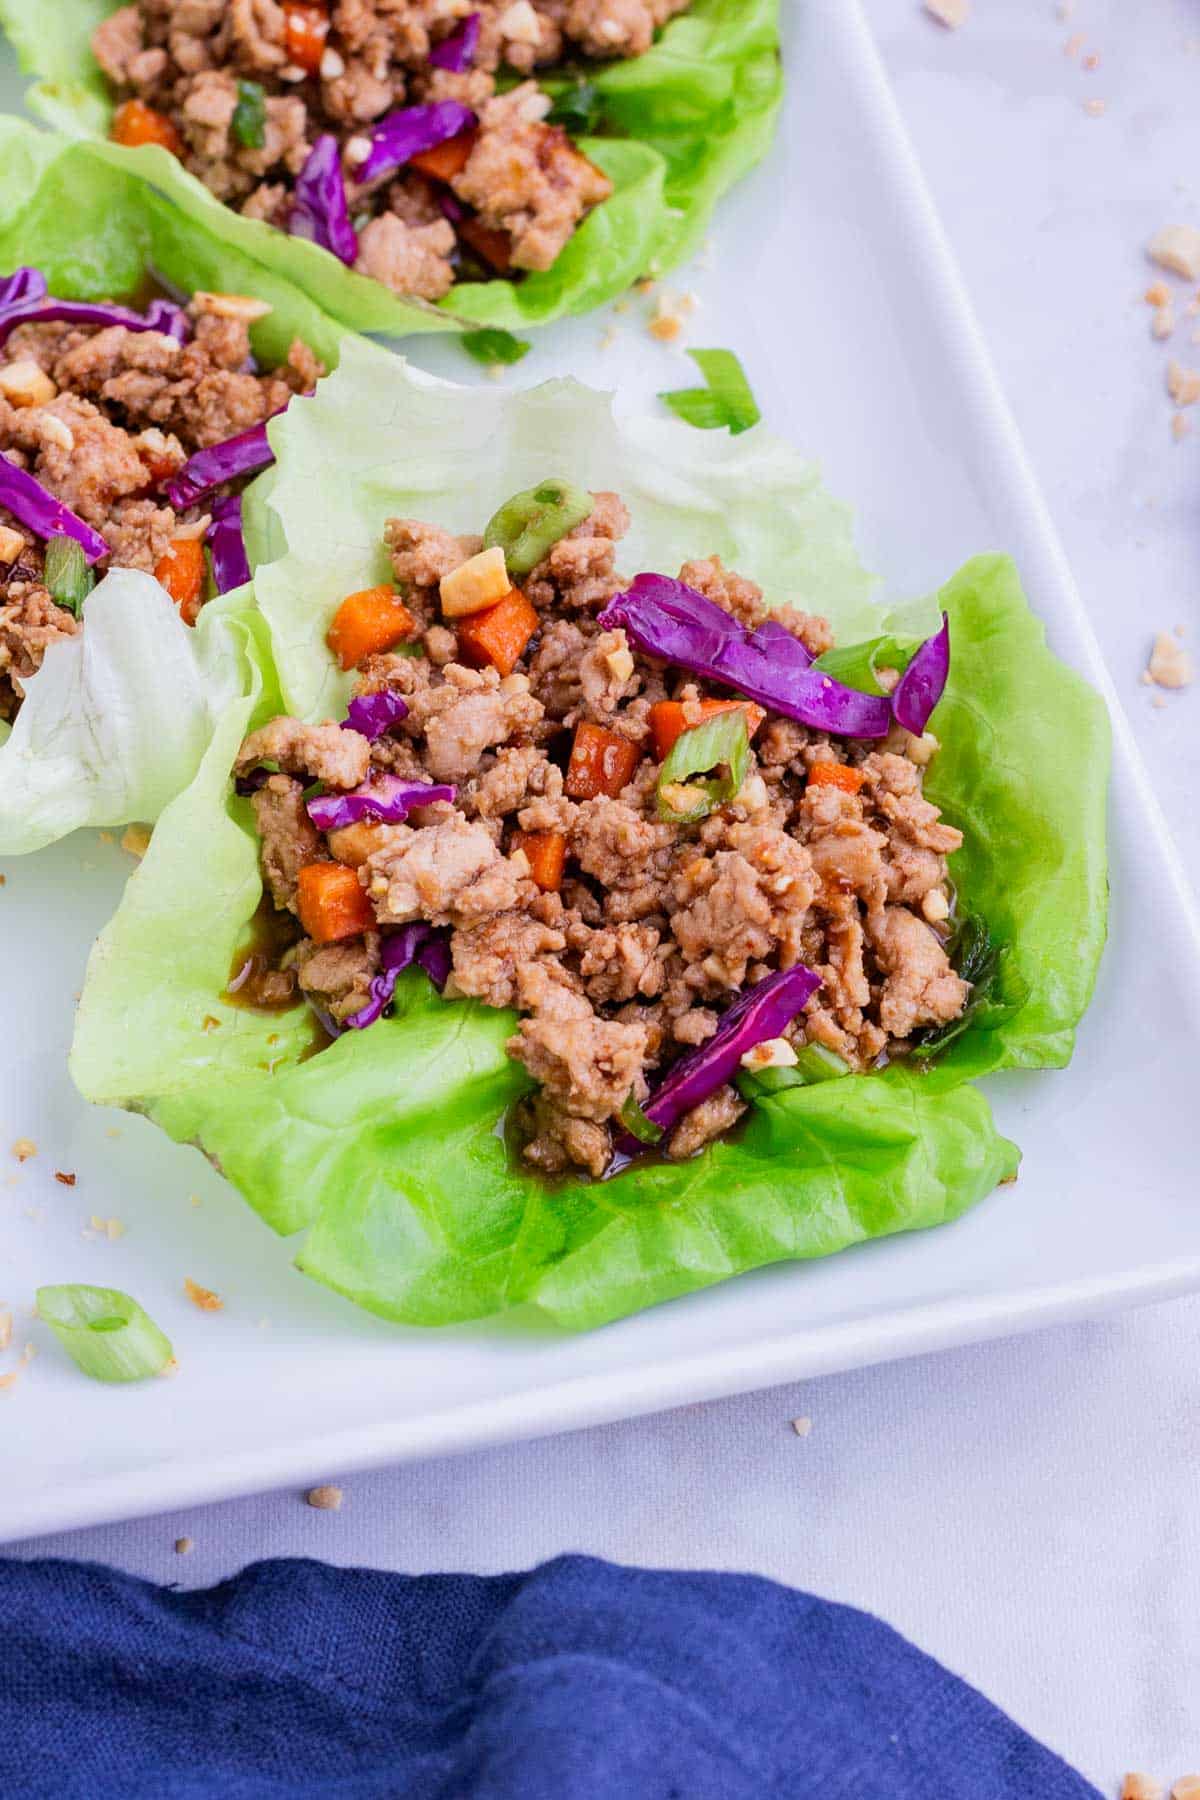 Thai-flavored chicken is served inside a lettuce leaf for a low carb meal.